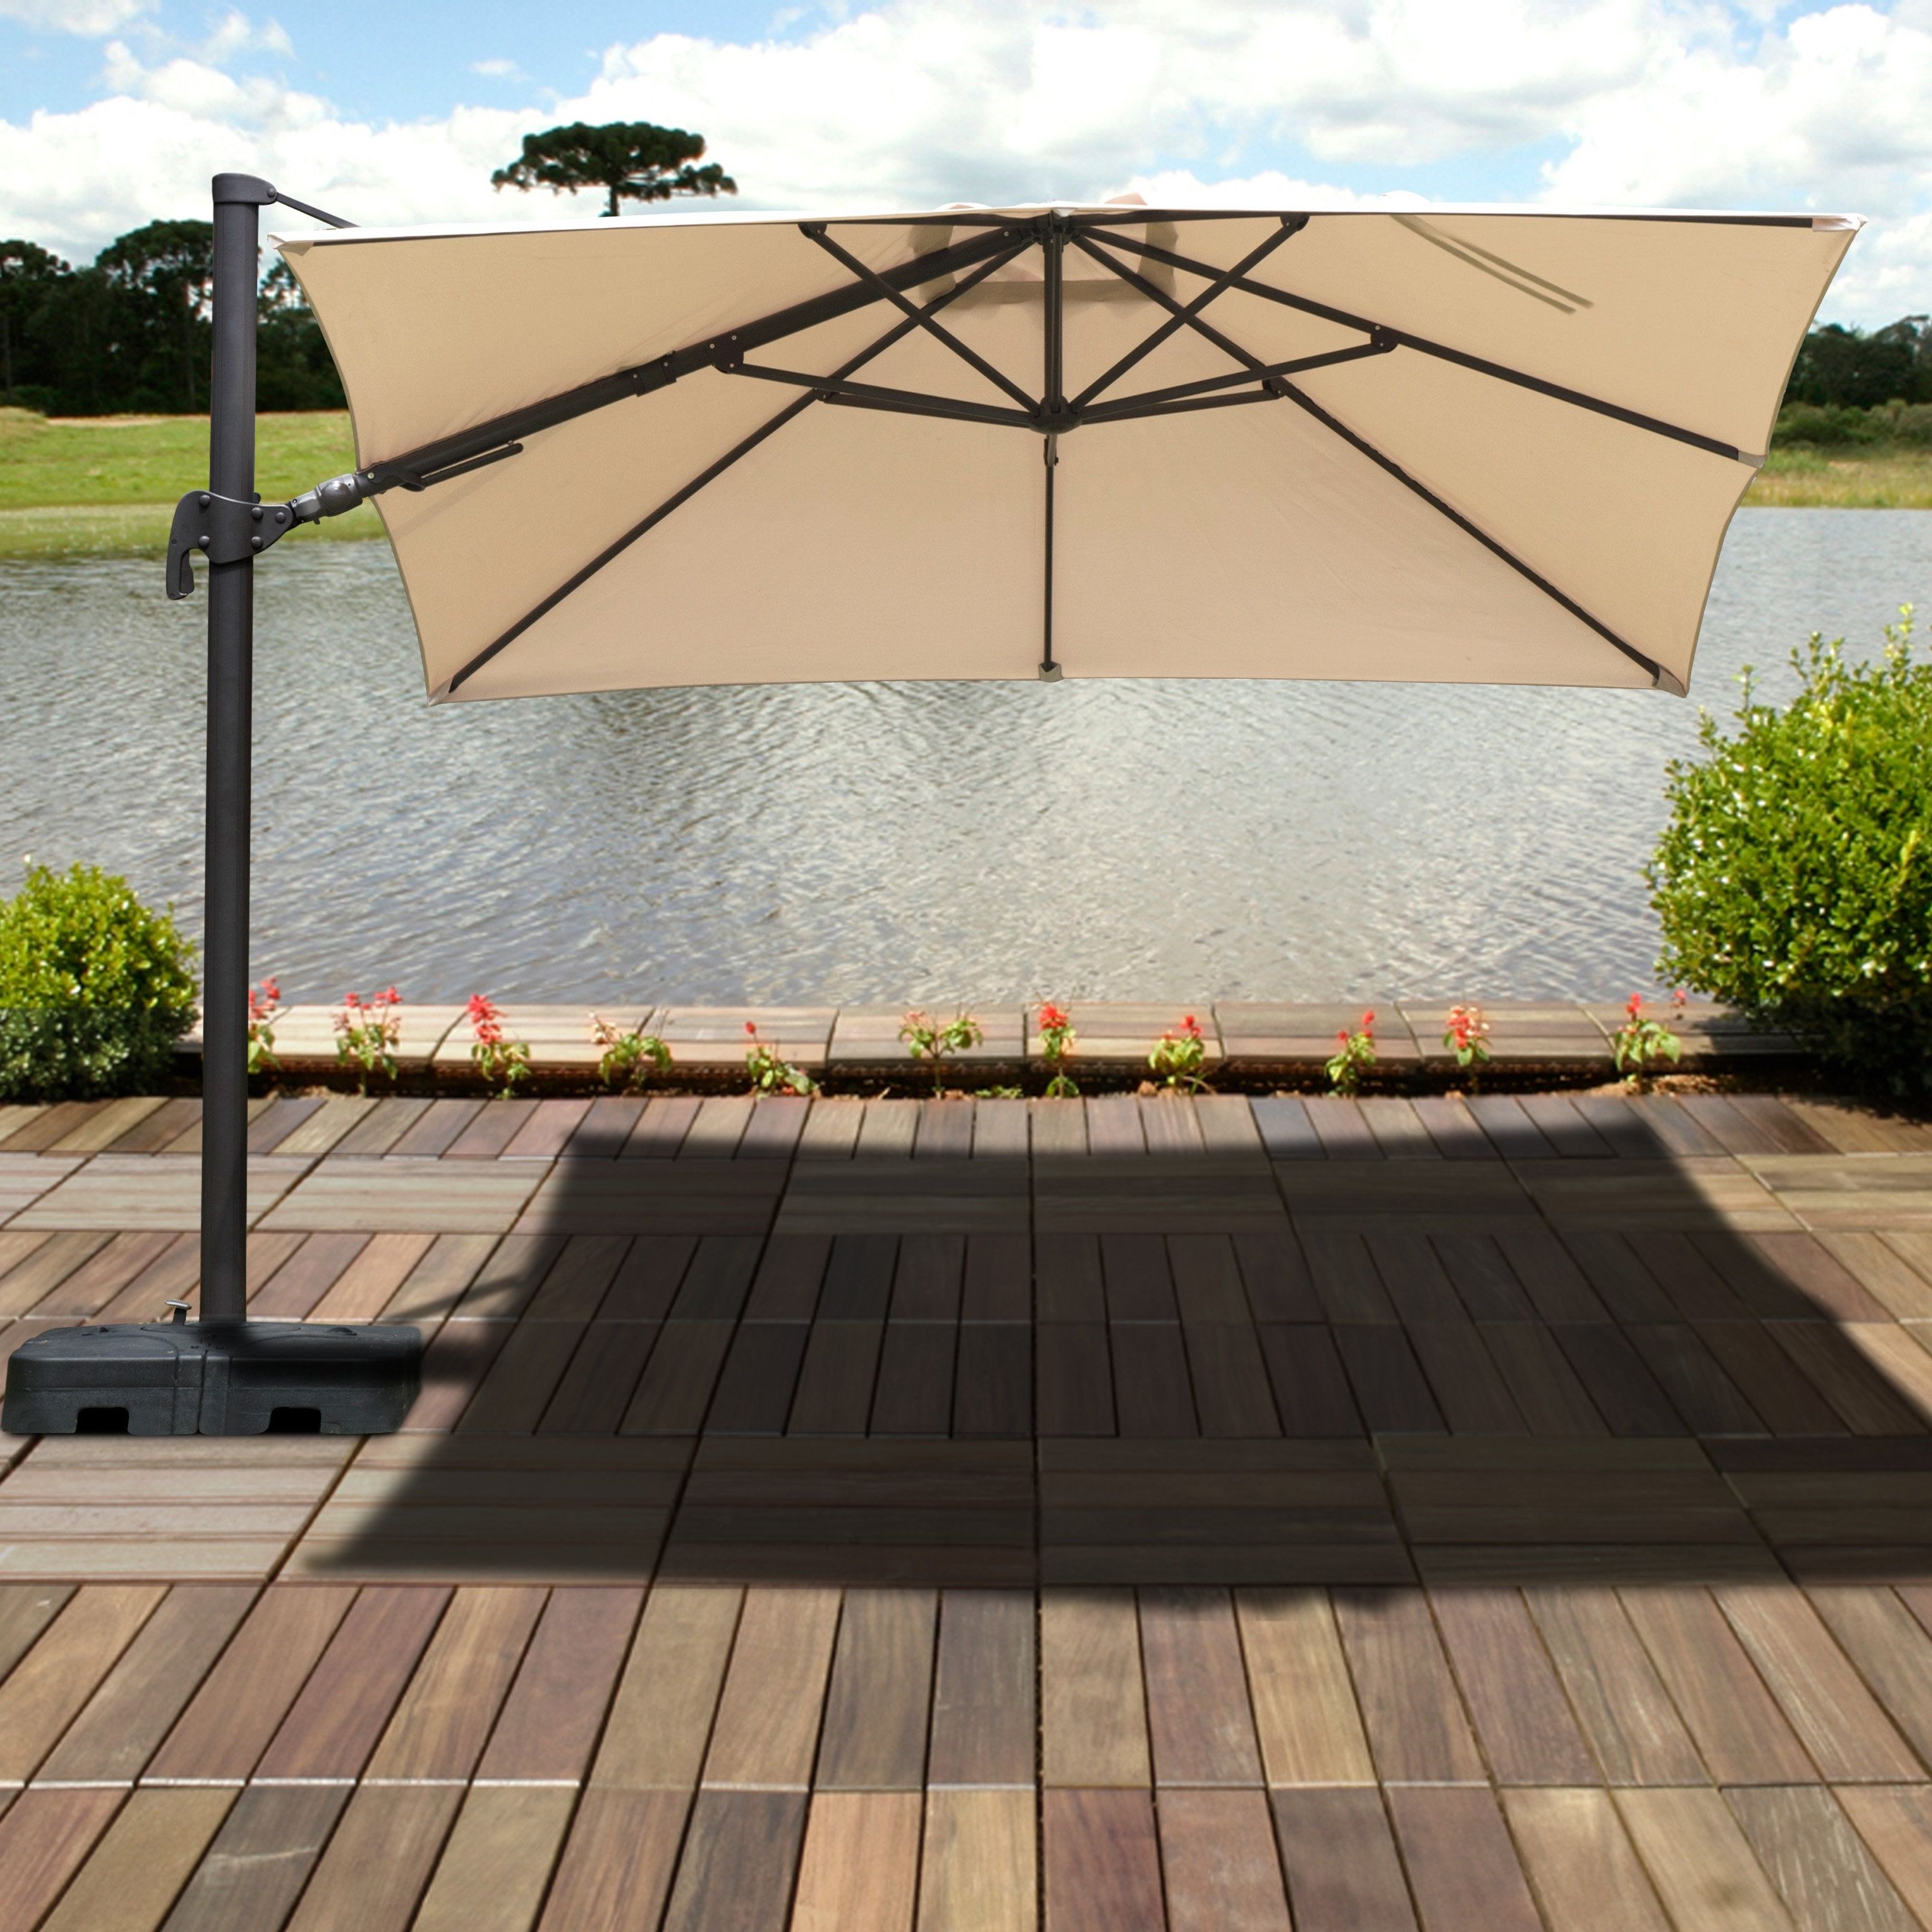 Widely Used Gemmenne 10' Square Cantilever Umbrella Throughout Cora Square Cantilever Umbrellas (View 12 of 20)